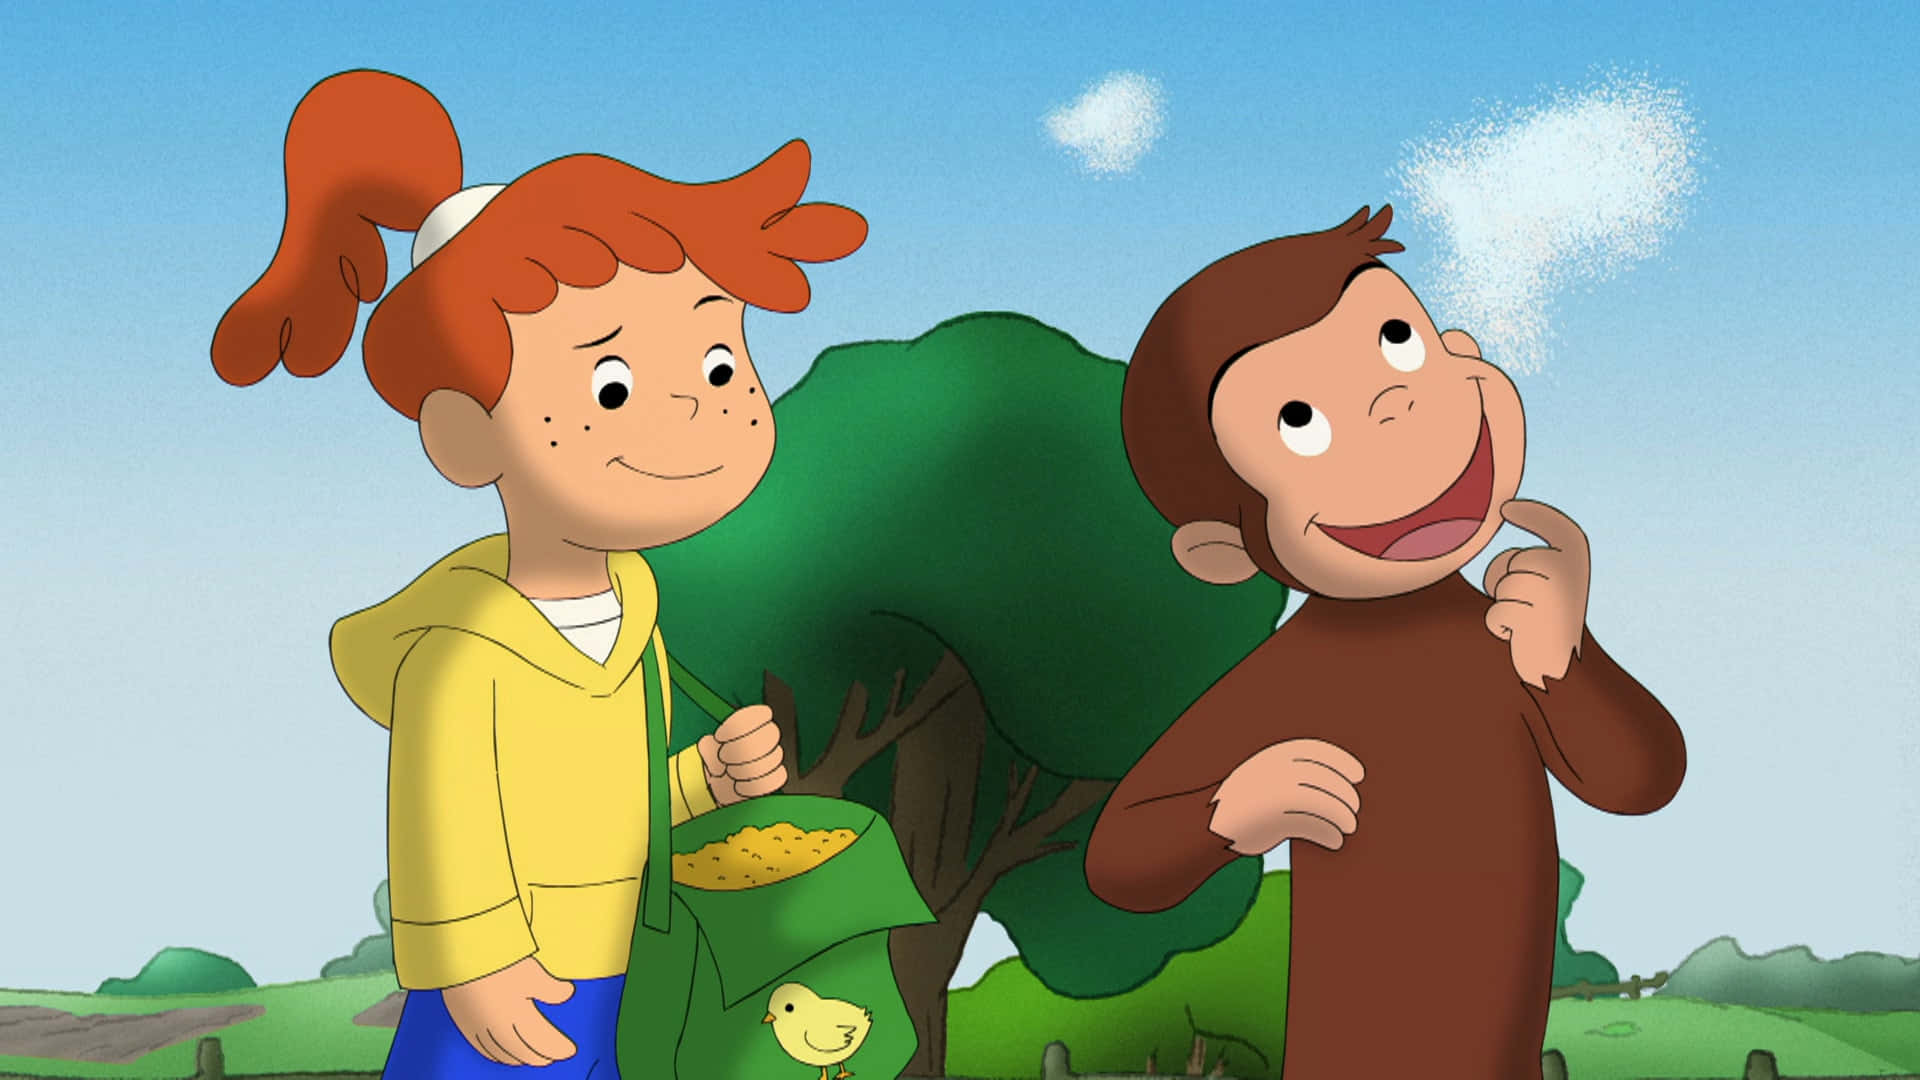 Curious George is ready to take on a new adventure.